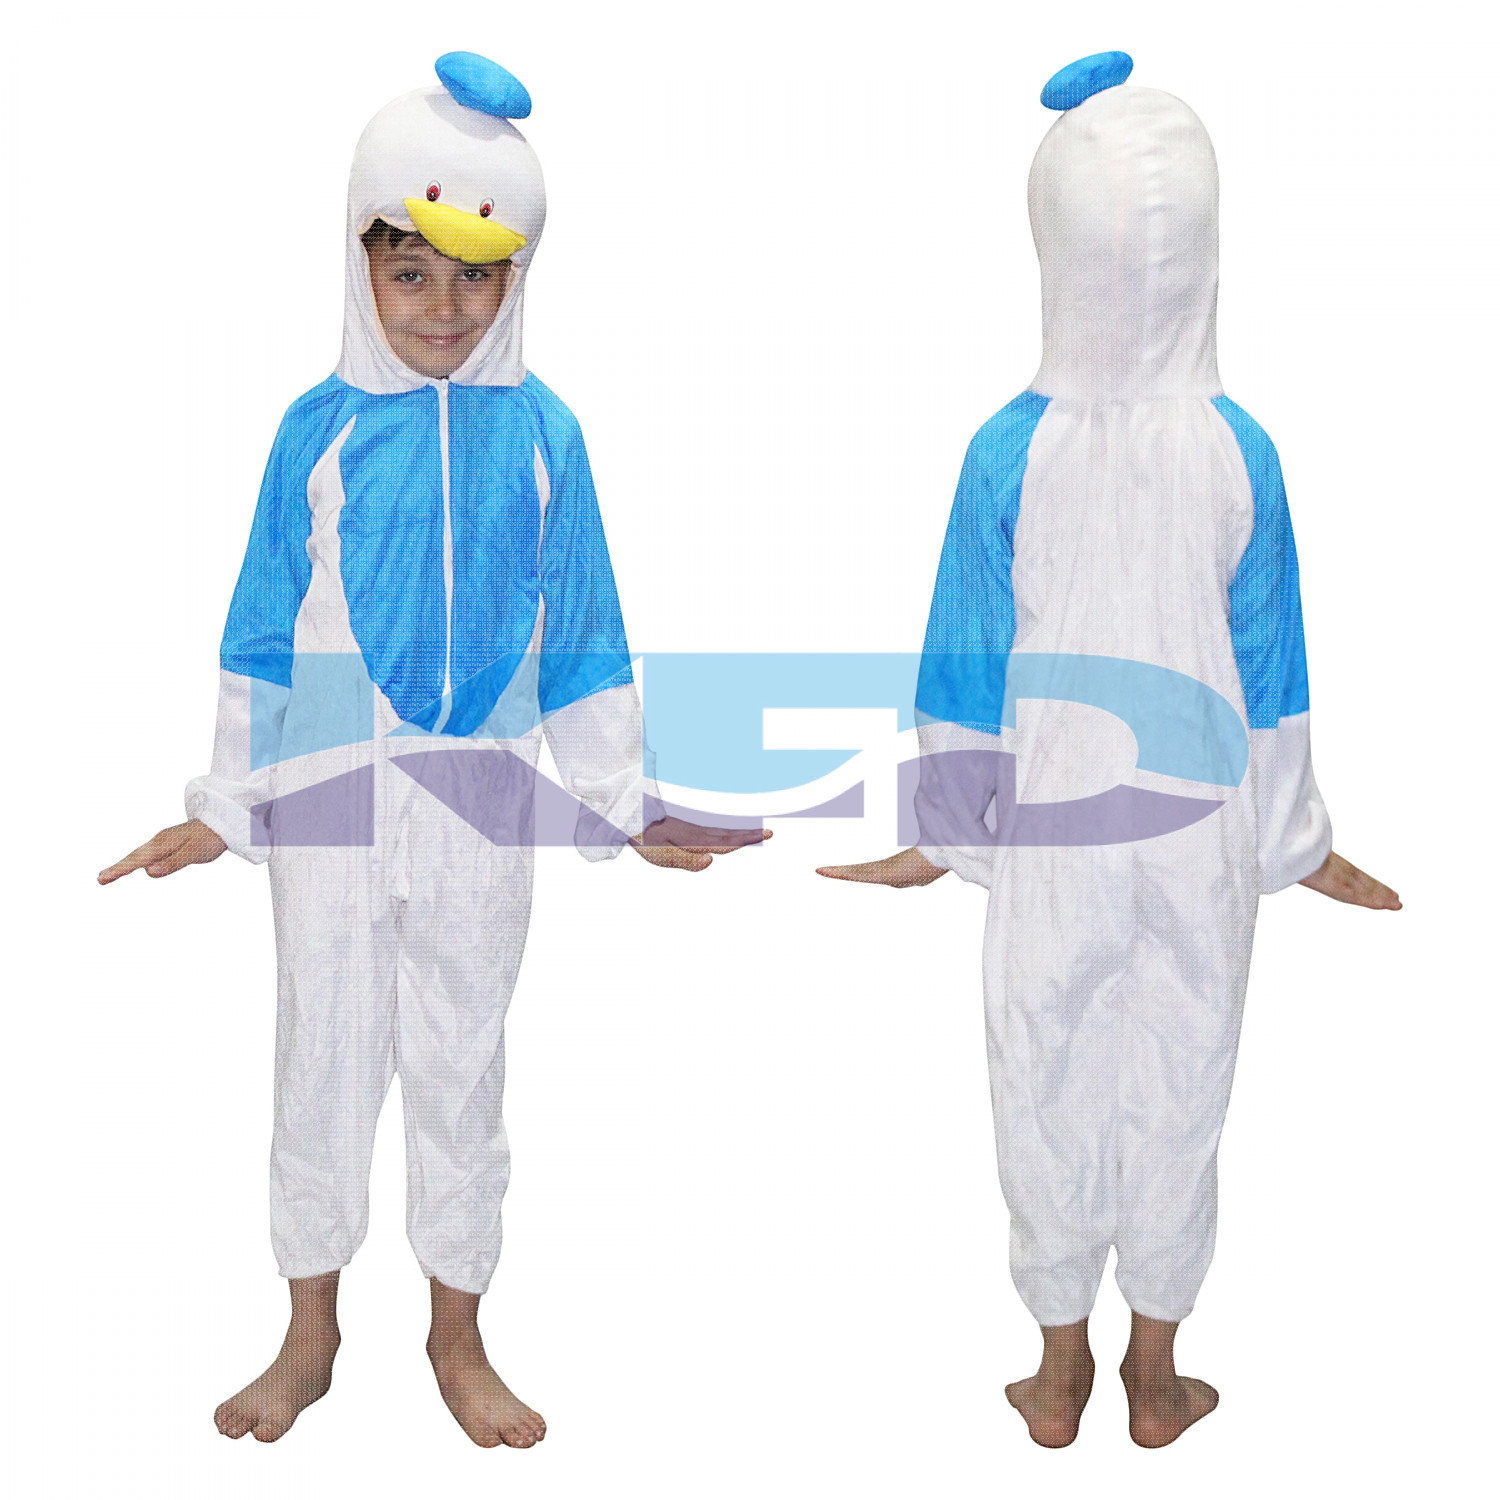 Donal Duck Fancy dress for kids,Diseny Cartoon Costume for Annual function/Theme Party/Stage Shows/Competition/Birthday Party Dress